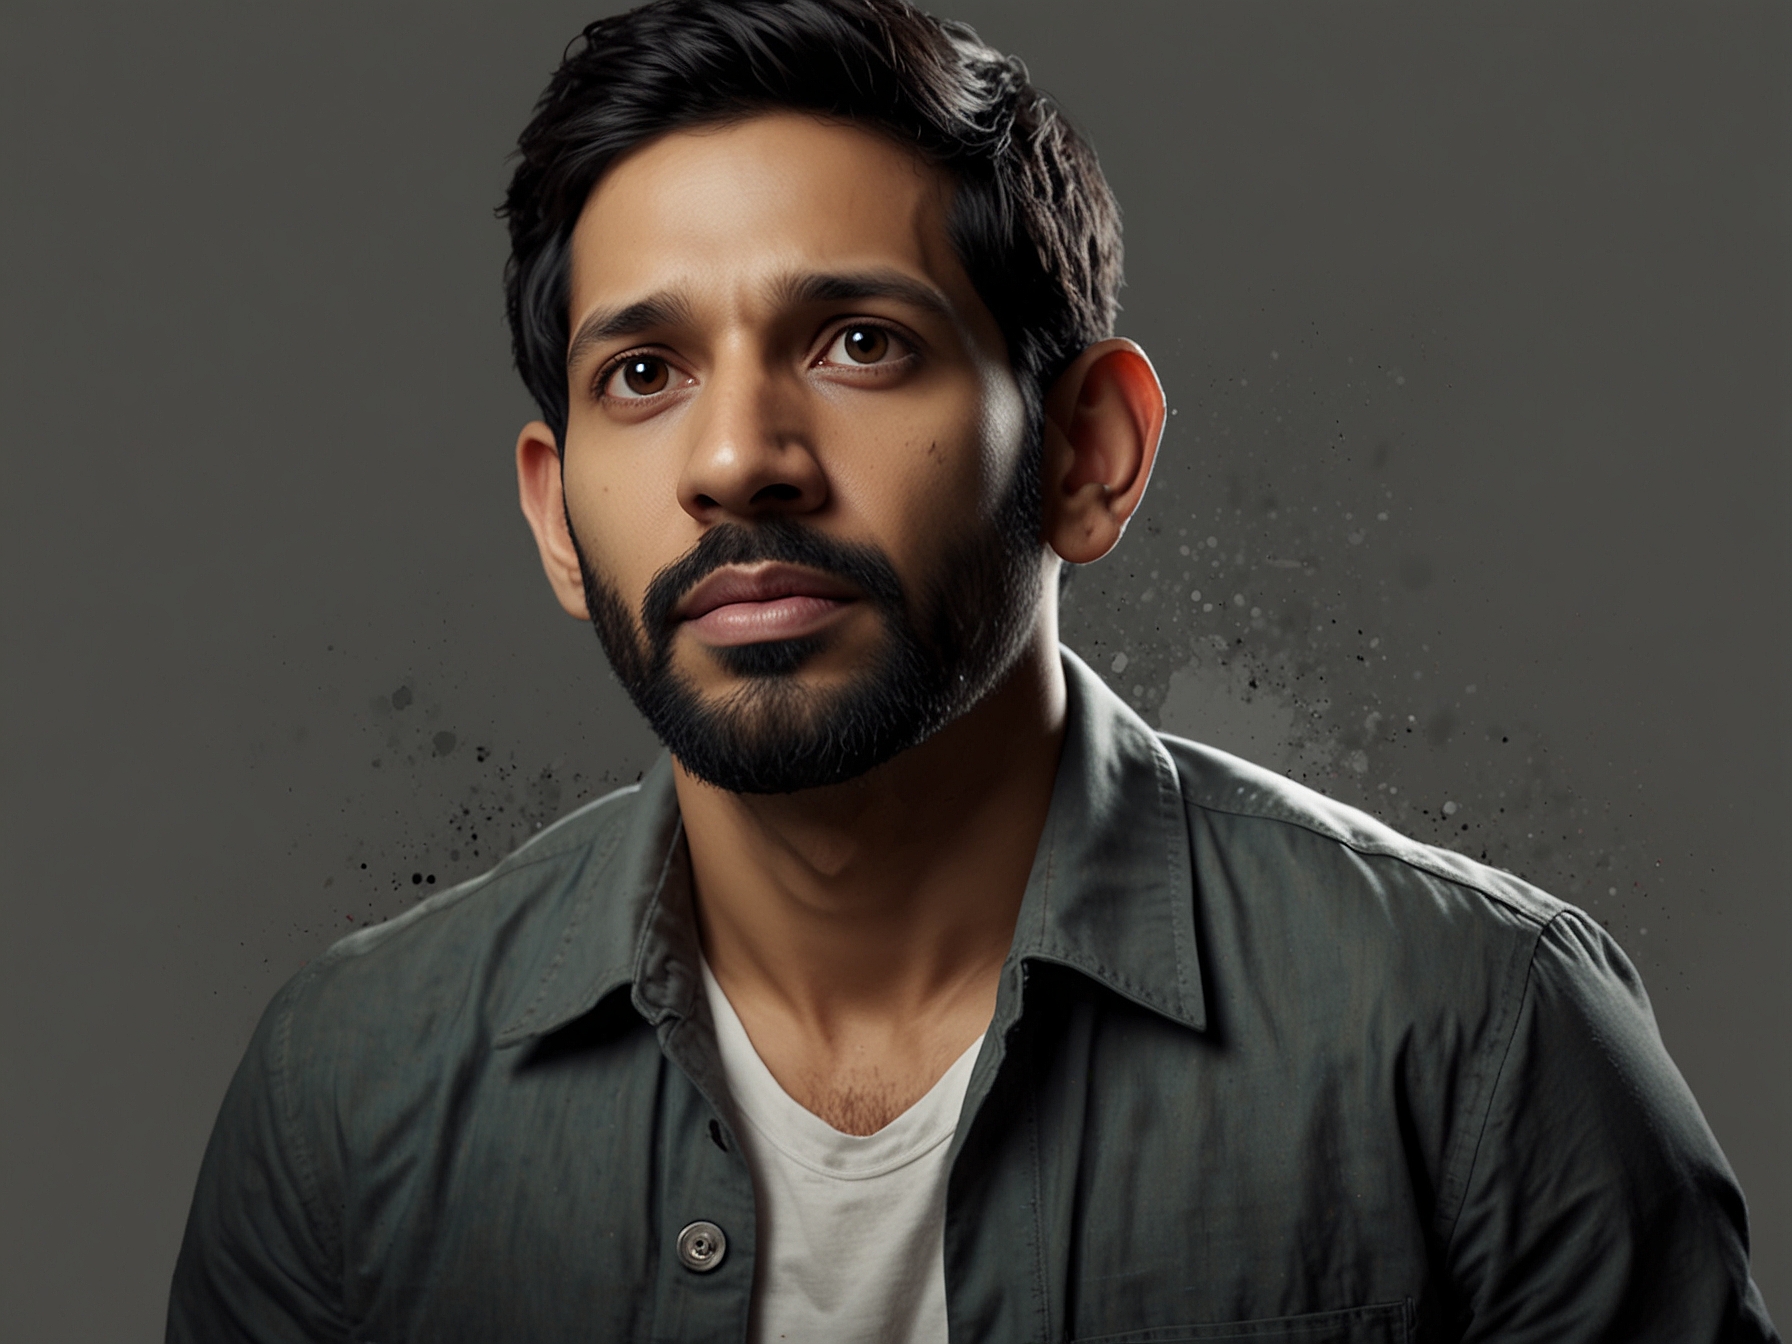 A still from '12th Fail' featuring Vikrant Massey portraying the protagonist's struggles and triumphs, reflecting the film's central theme of perseverance and resilience.